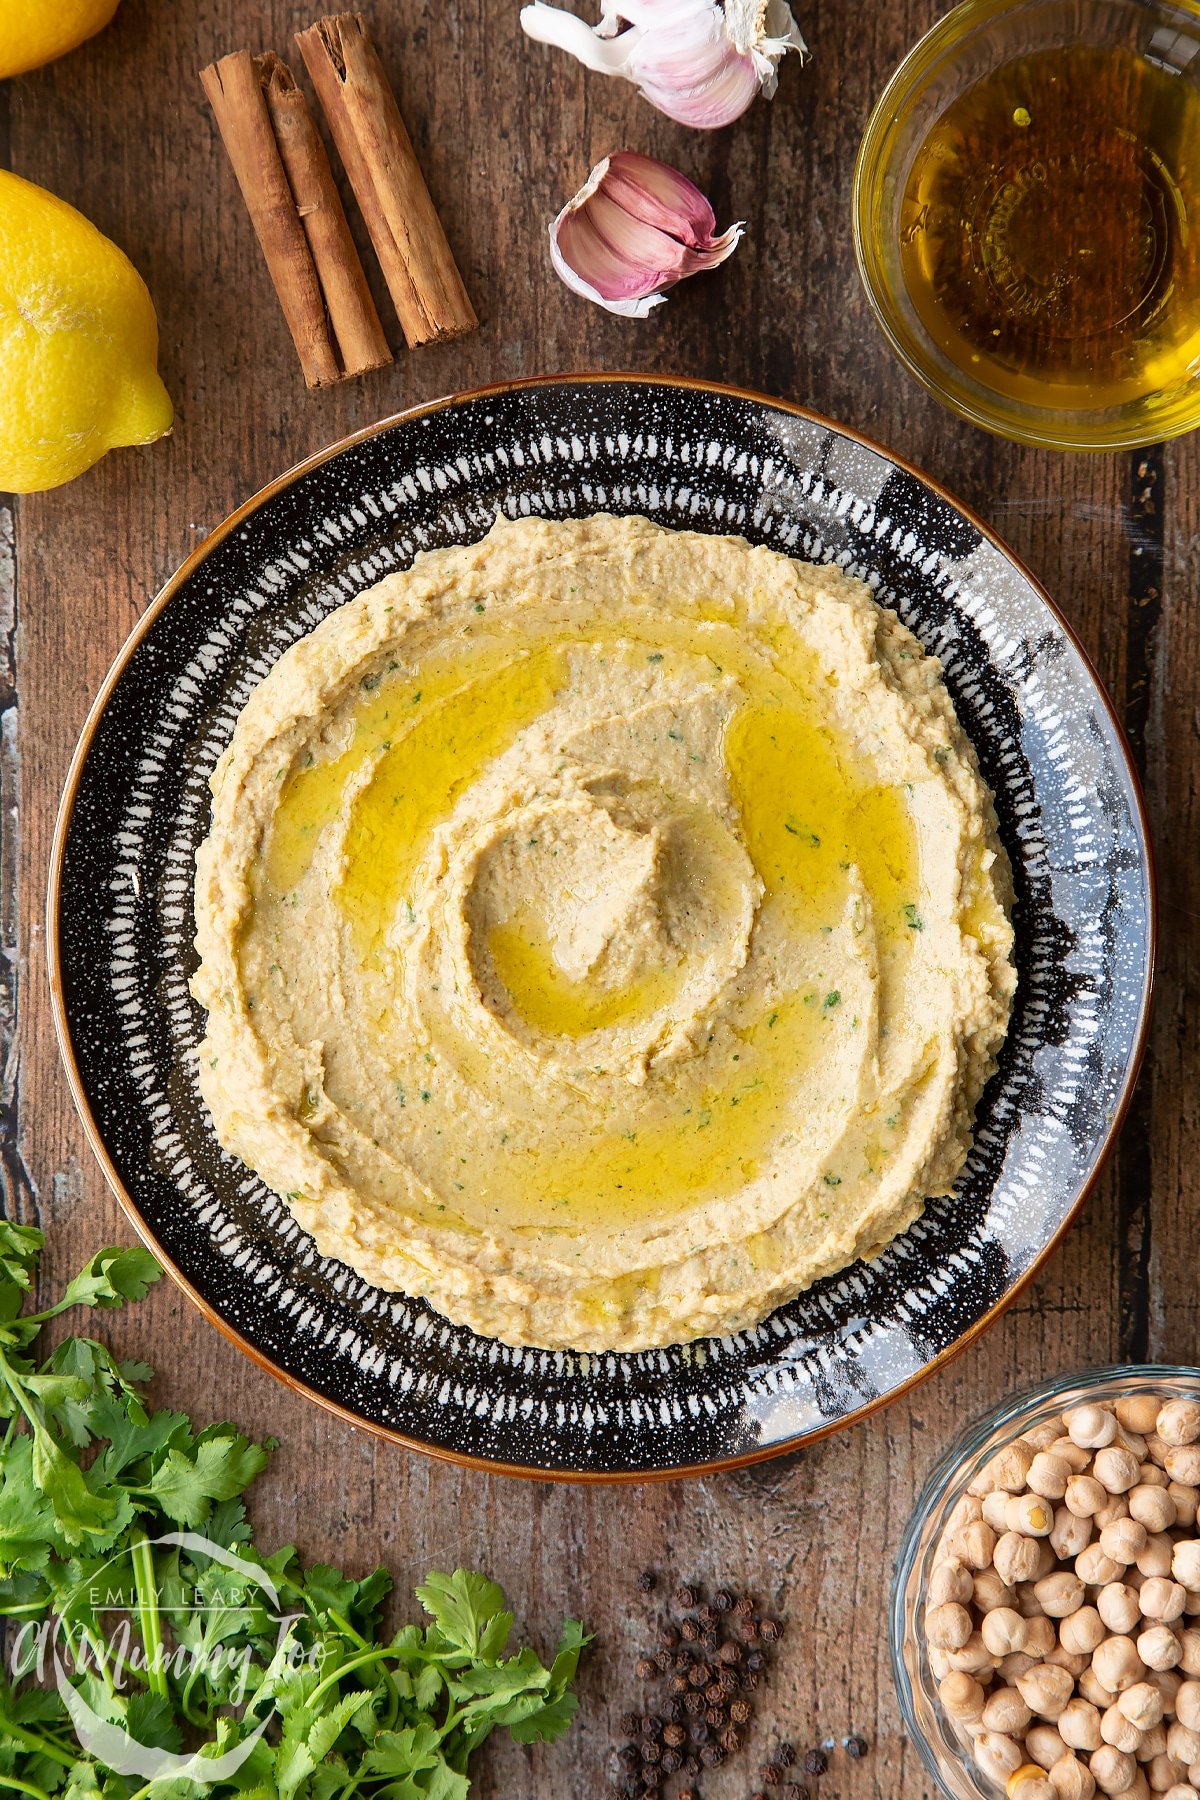 Cinnamon hummus from above. It has been drizzled with olive oil